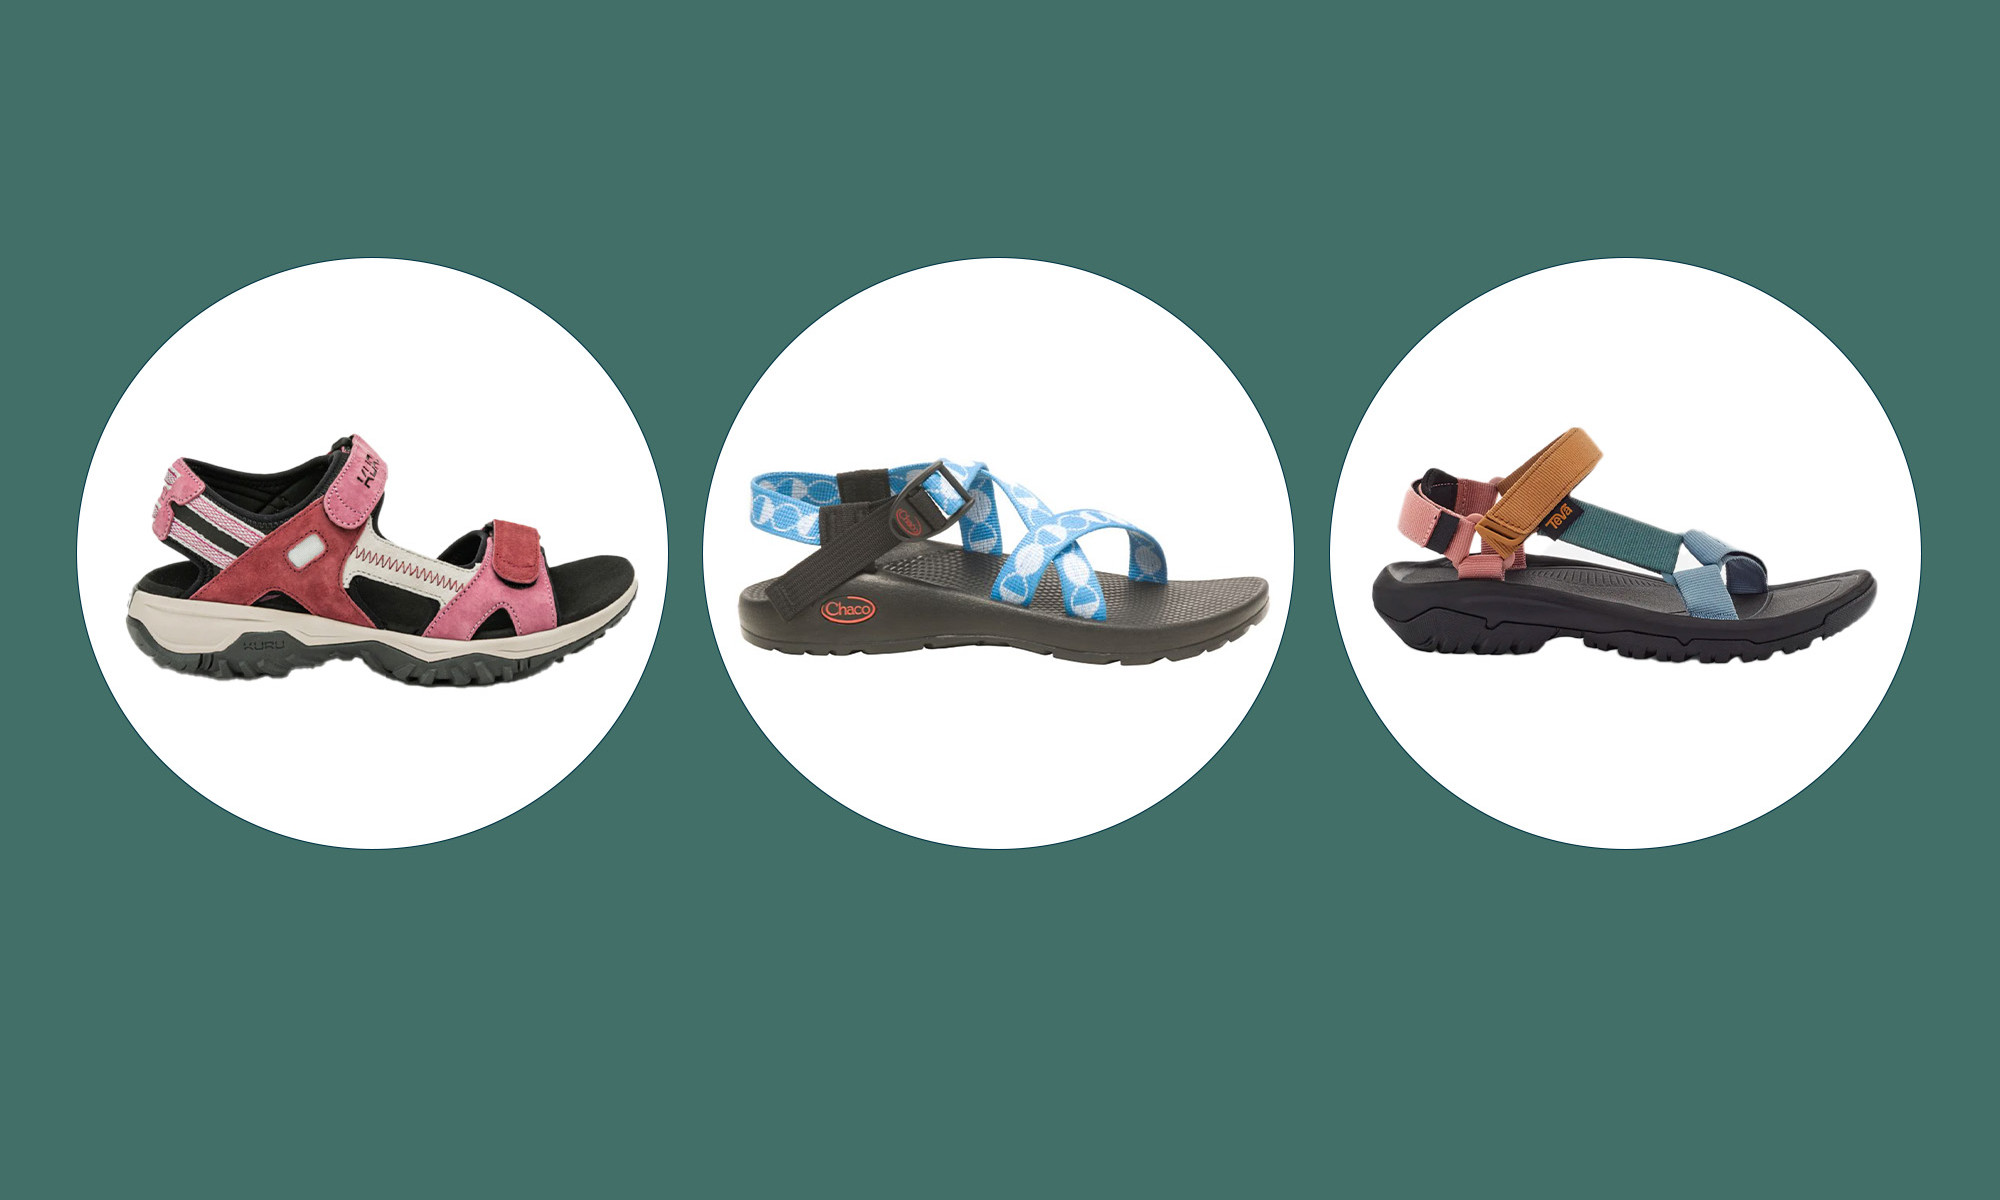 Teva vs Chaco: Which Hiking Sandal Is Best For You? | Teva sandals hiking,  Sandals, Chacos